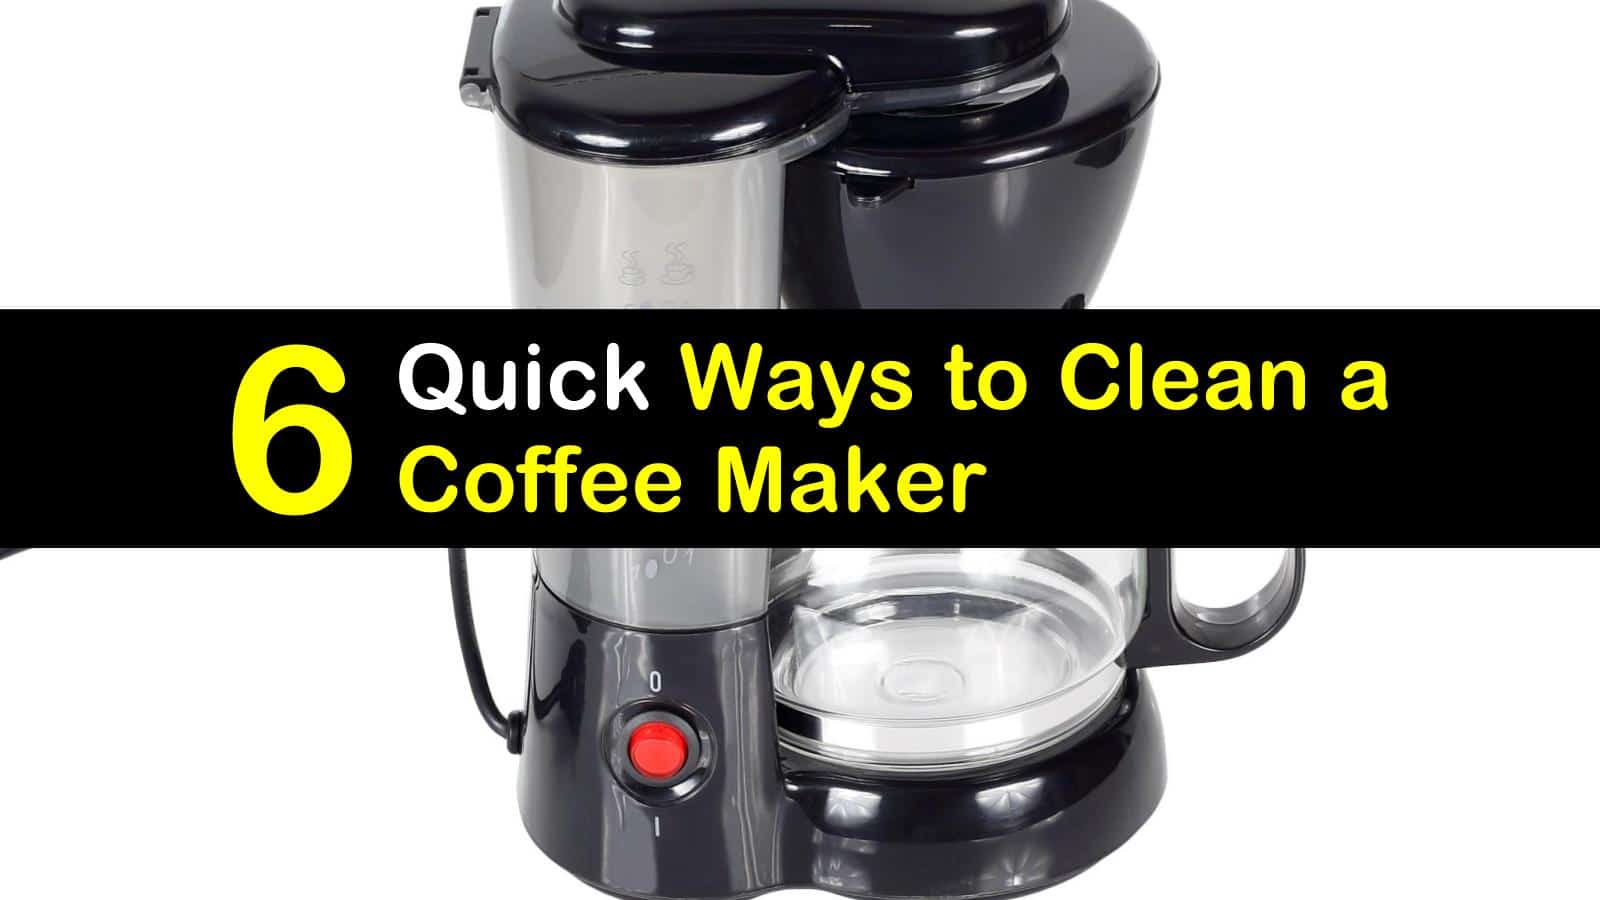 ways to clean a coffee maker titleimg1